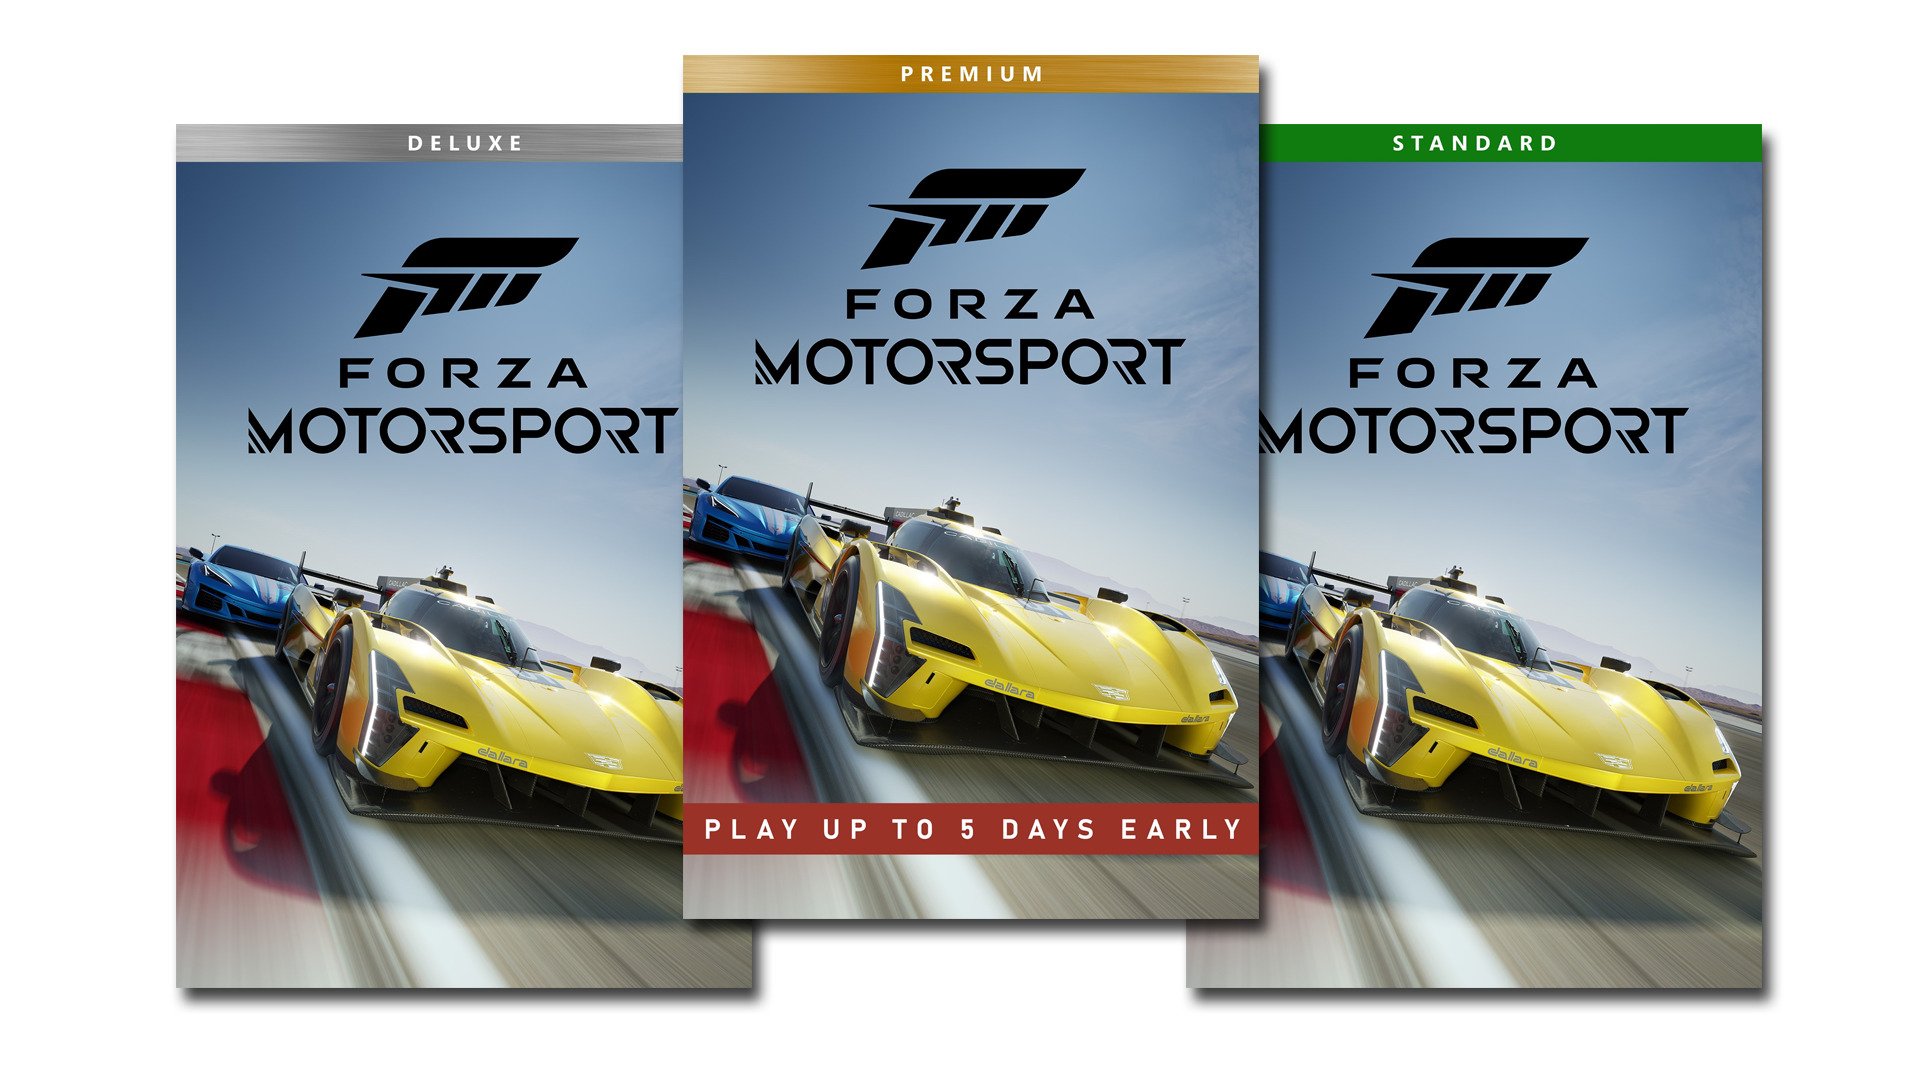 Pre-Order Editions – Forza Support